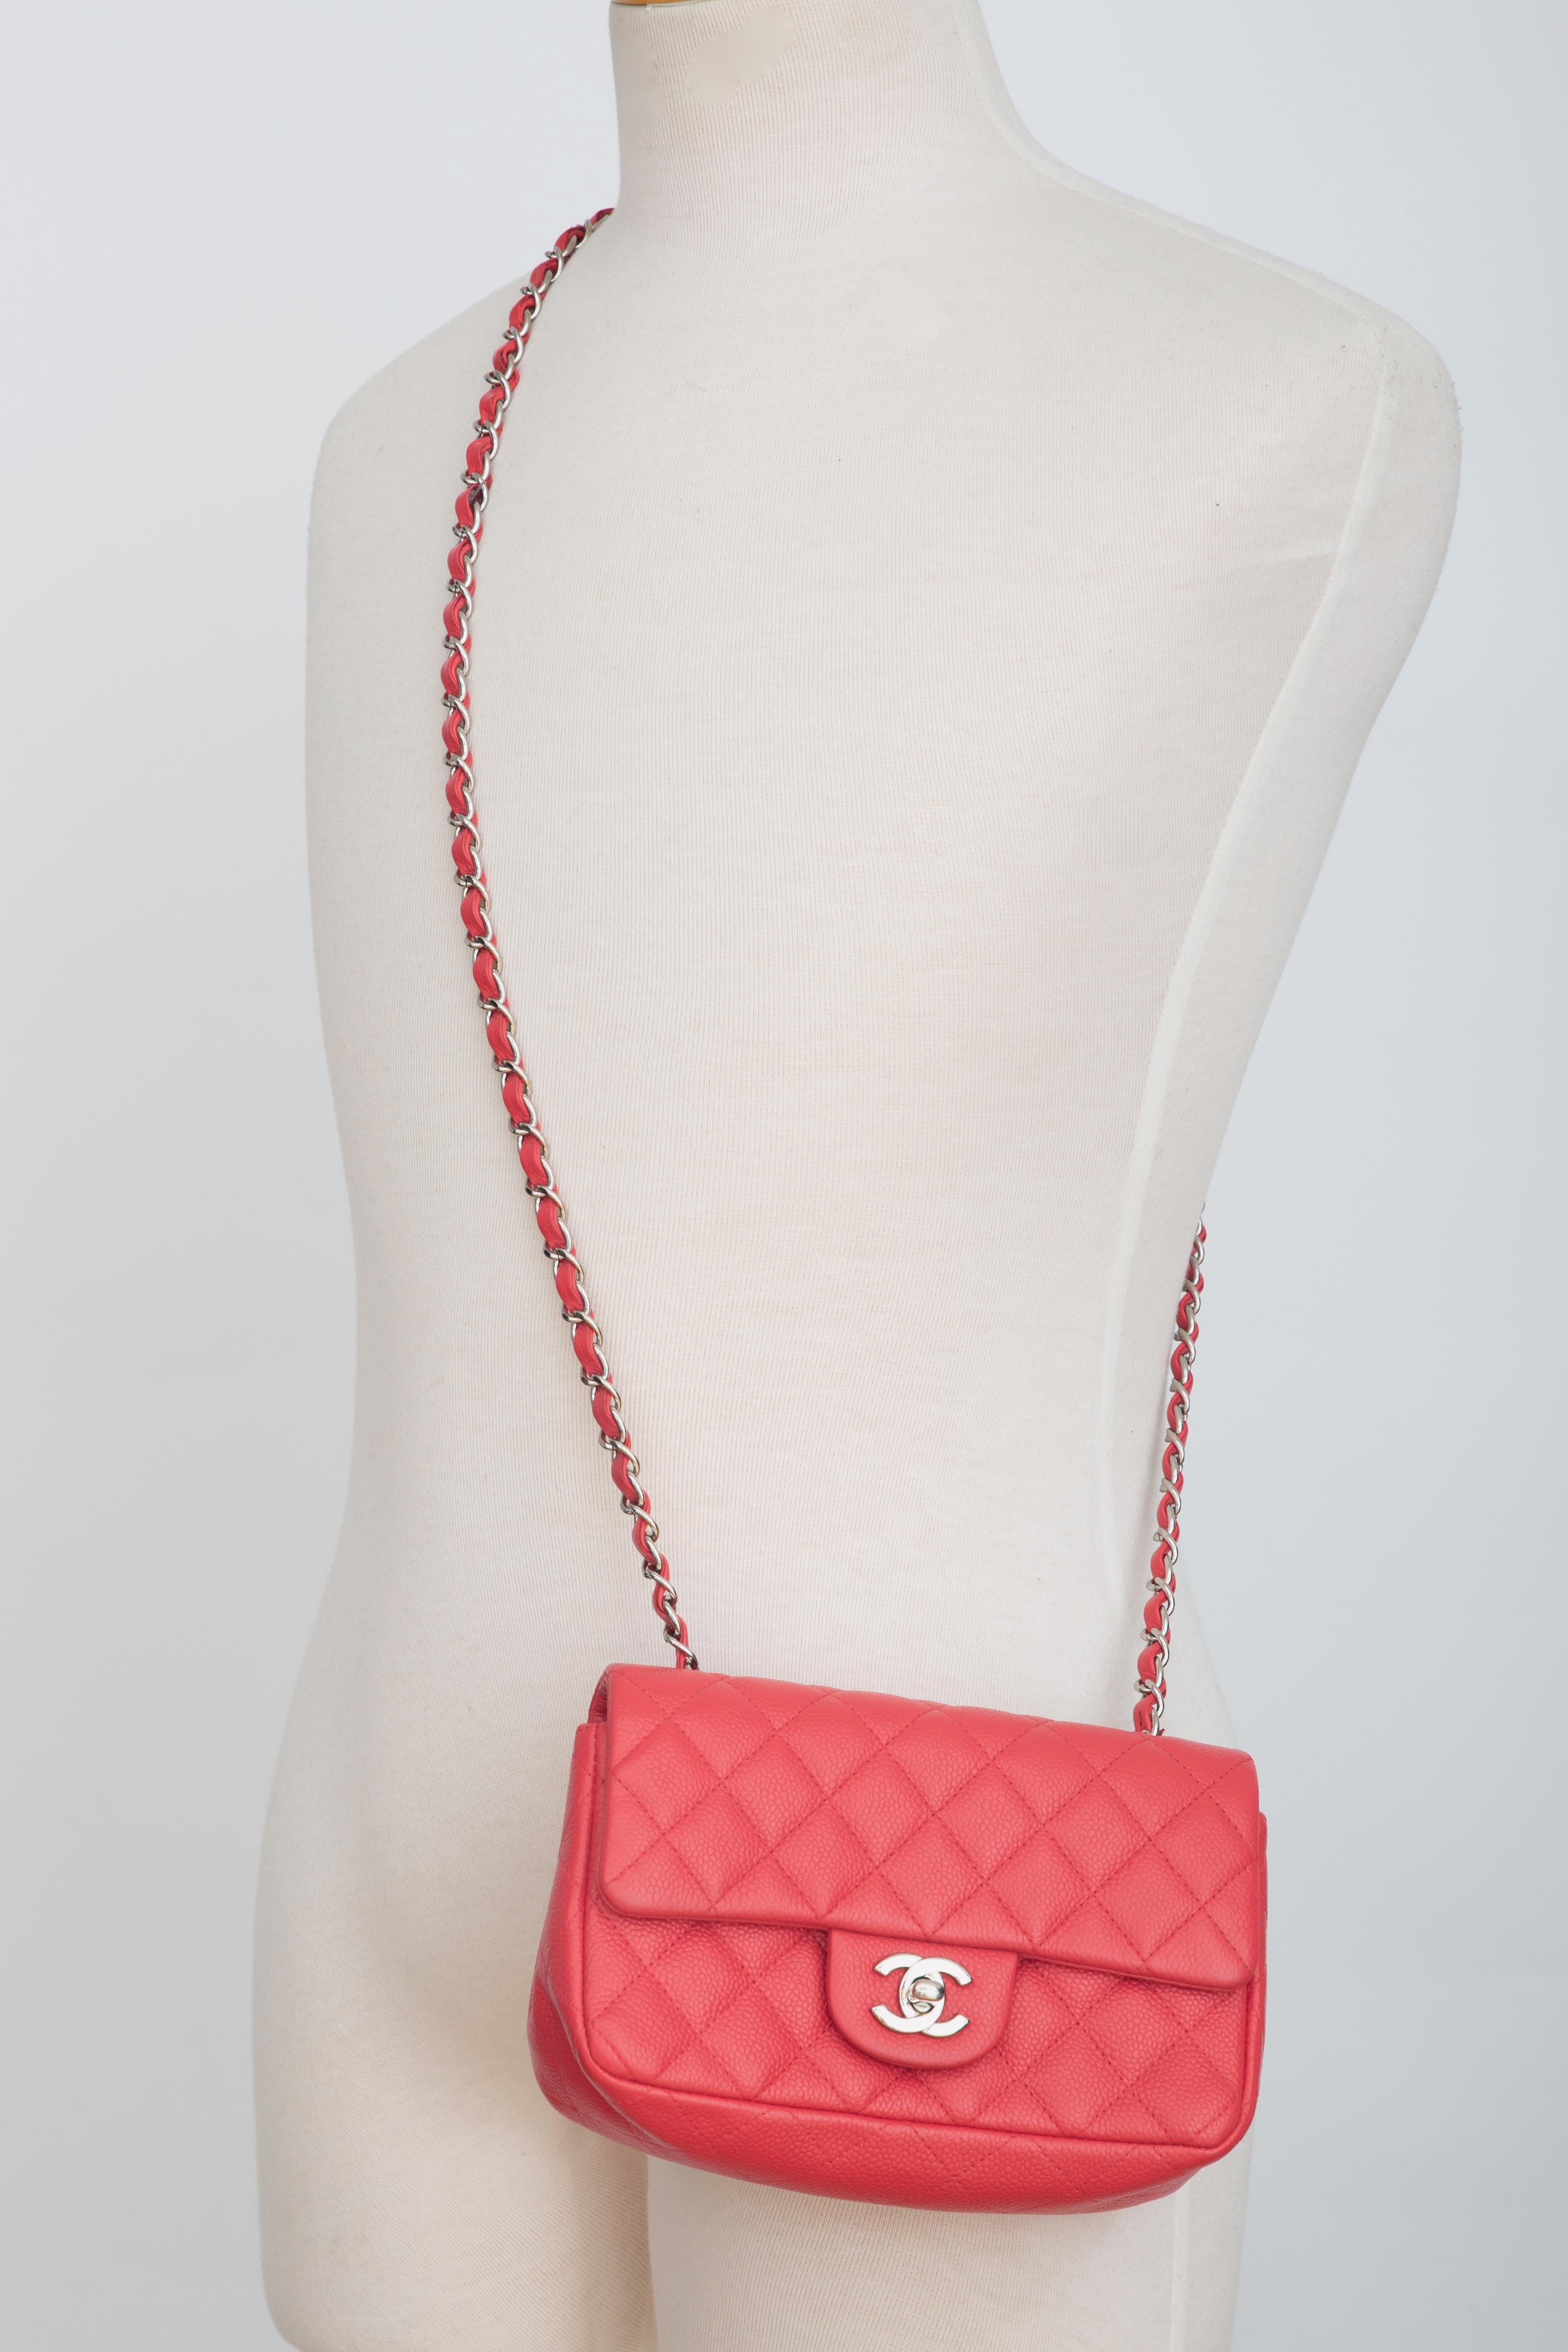 Chanel Caviar Pink Timeless Classic Mini Flap Bag (2012) For Sale 4